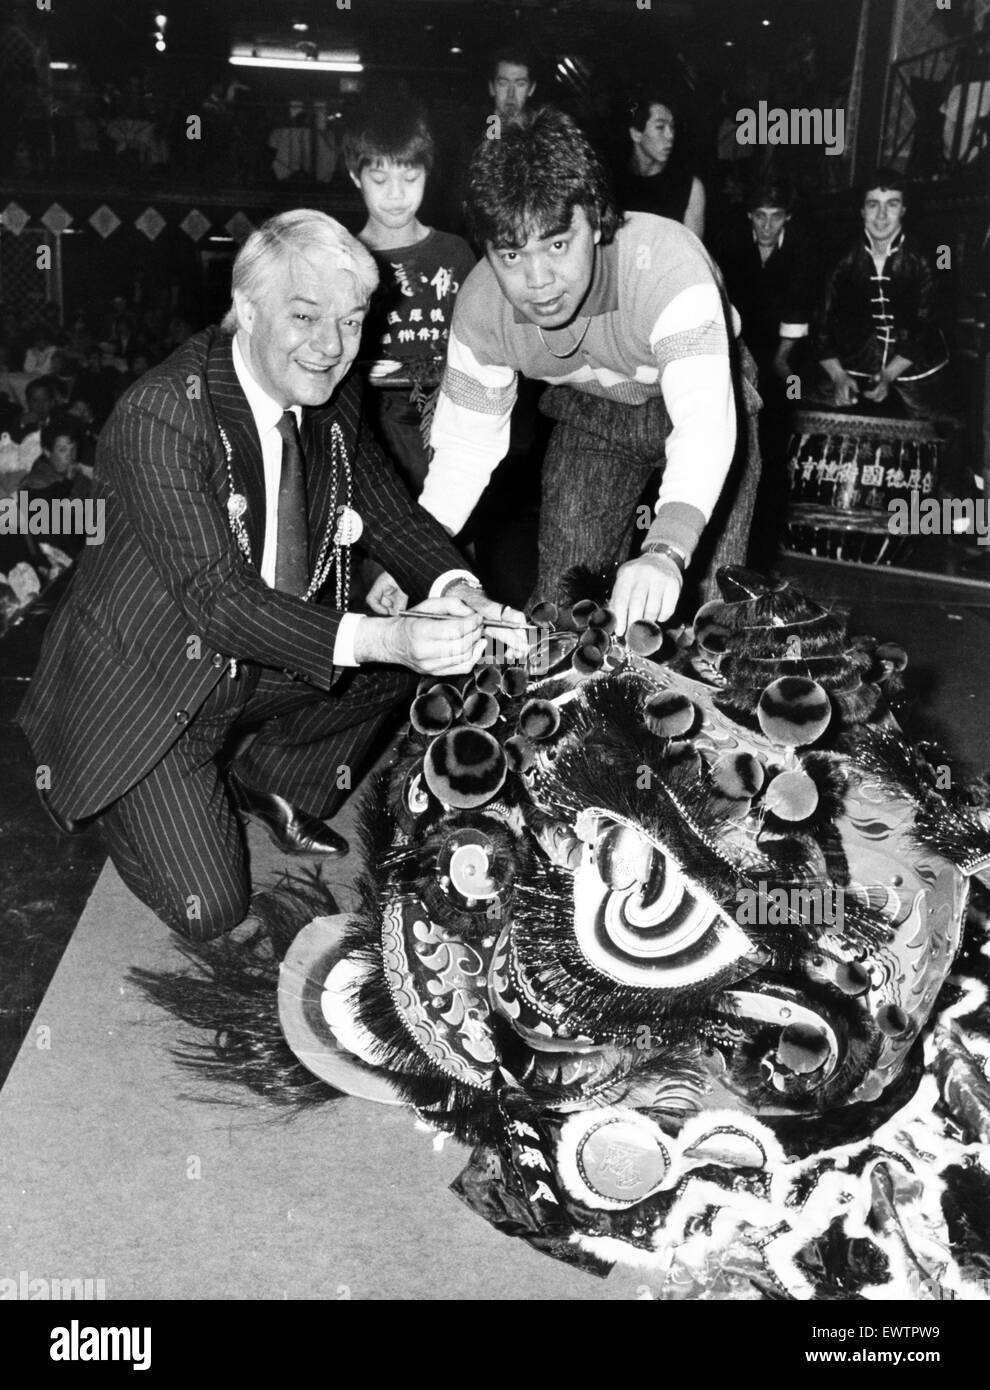 Lord Mayor Councillor Roy Burgess 'wakens the lion' with the help of Edmund Ng at the start of three day celebrations narking the beginning of the Year of the Tiger. at the Mayfair Ballroom. 9th February 1986. Stock Photo